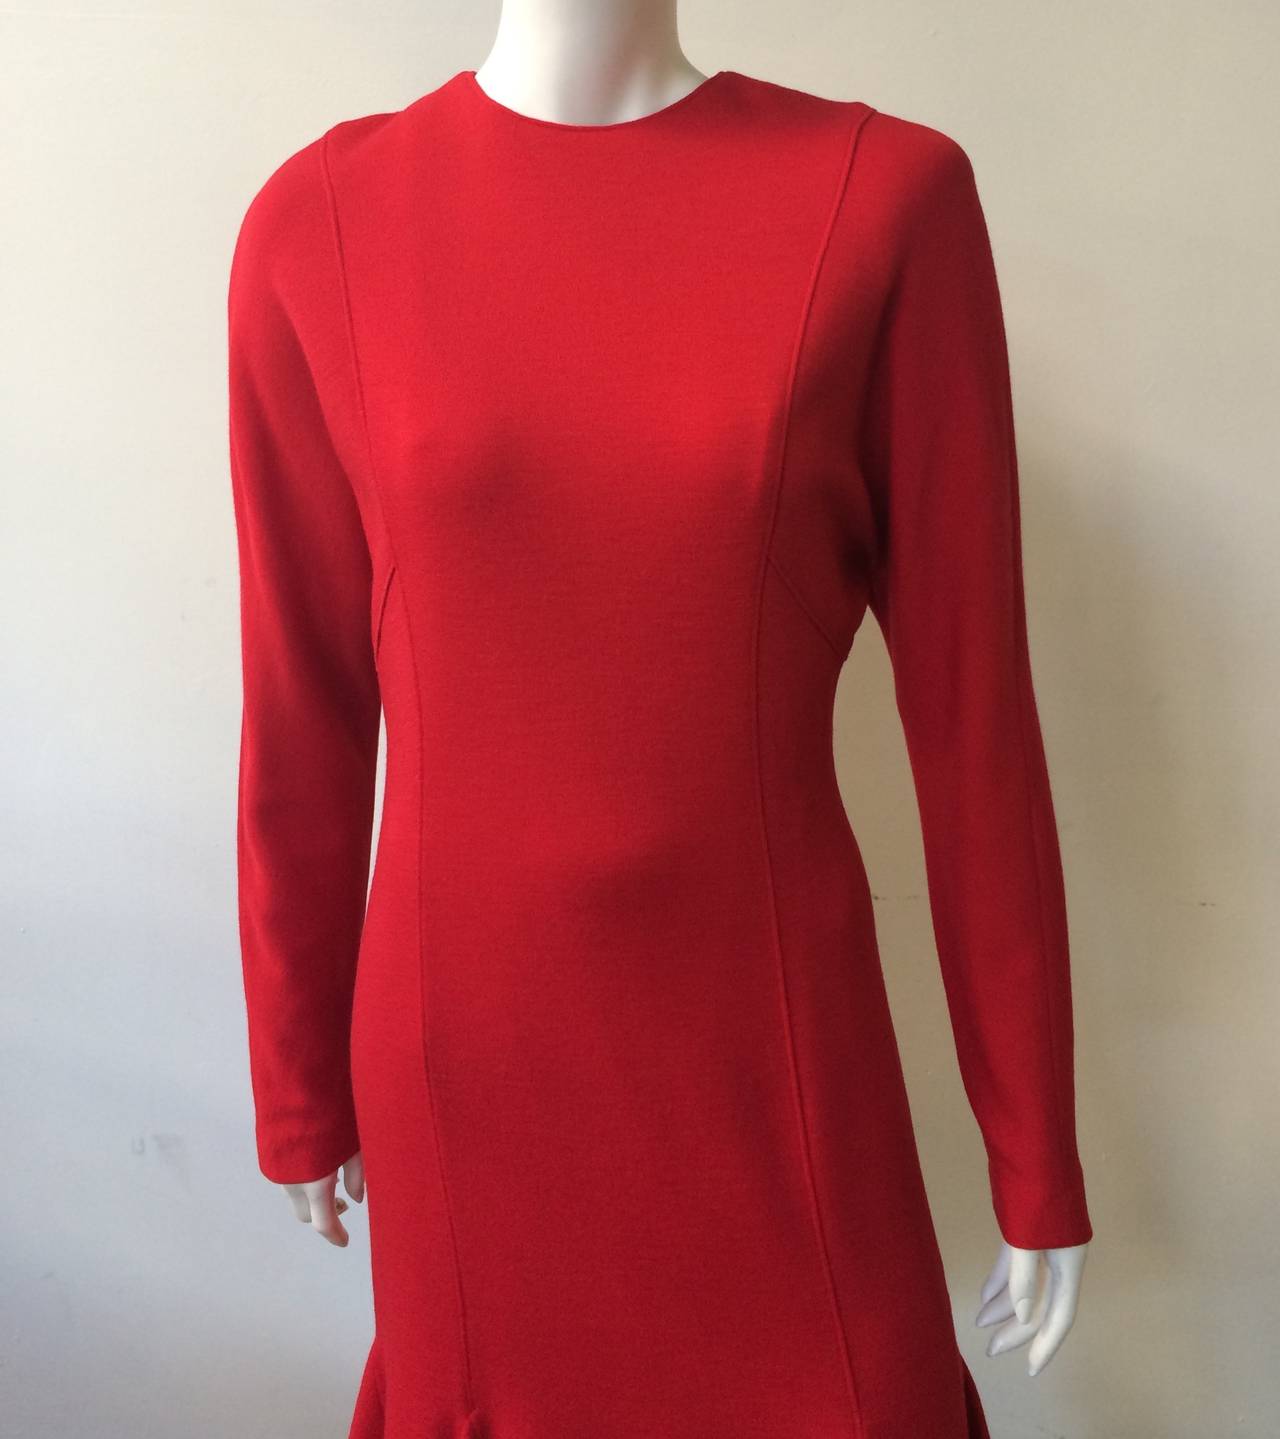 Hanae Mori Boutique for Neiman Marcus 1980s red wool jersey dress with 7 fabric covered buttons on back of dress is a size 6. Ladies please use your measuring tape so you can properly measure your bust, waist & hips for this lovely vintage piece.